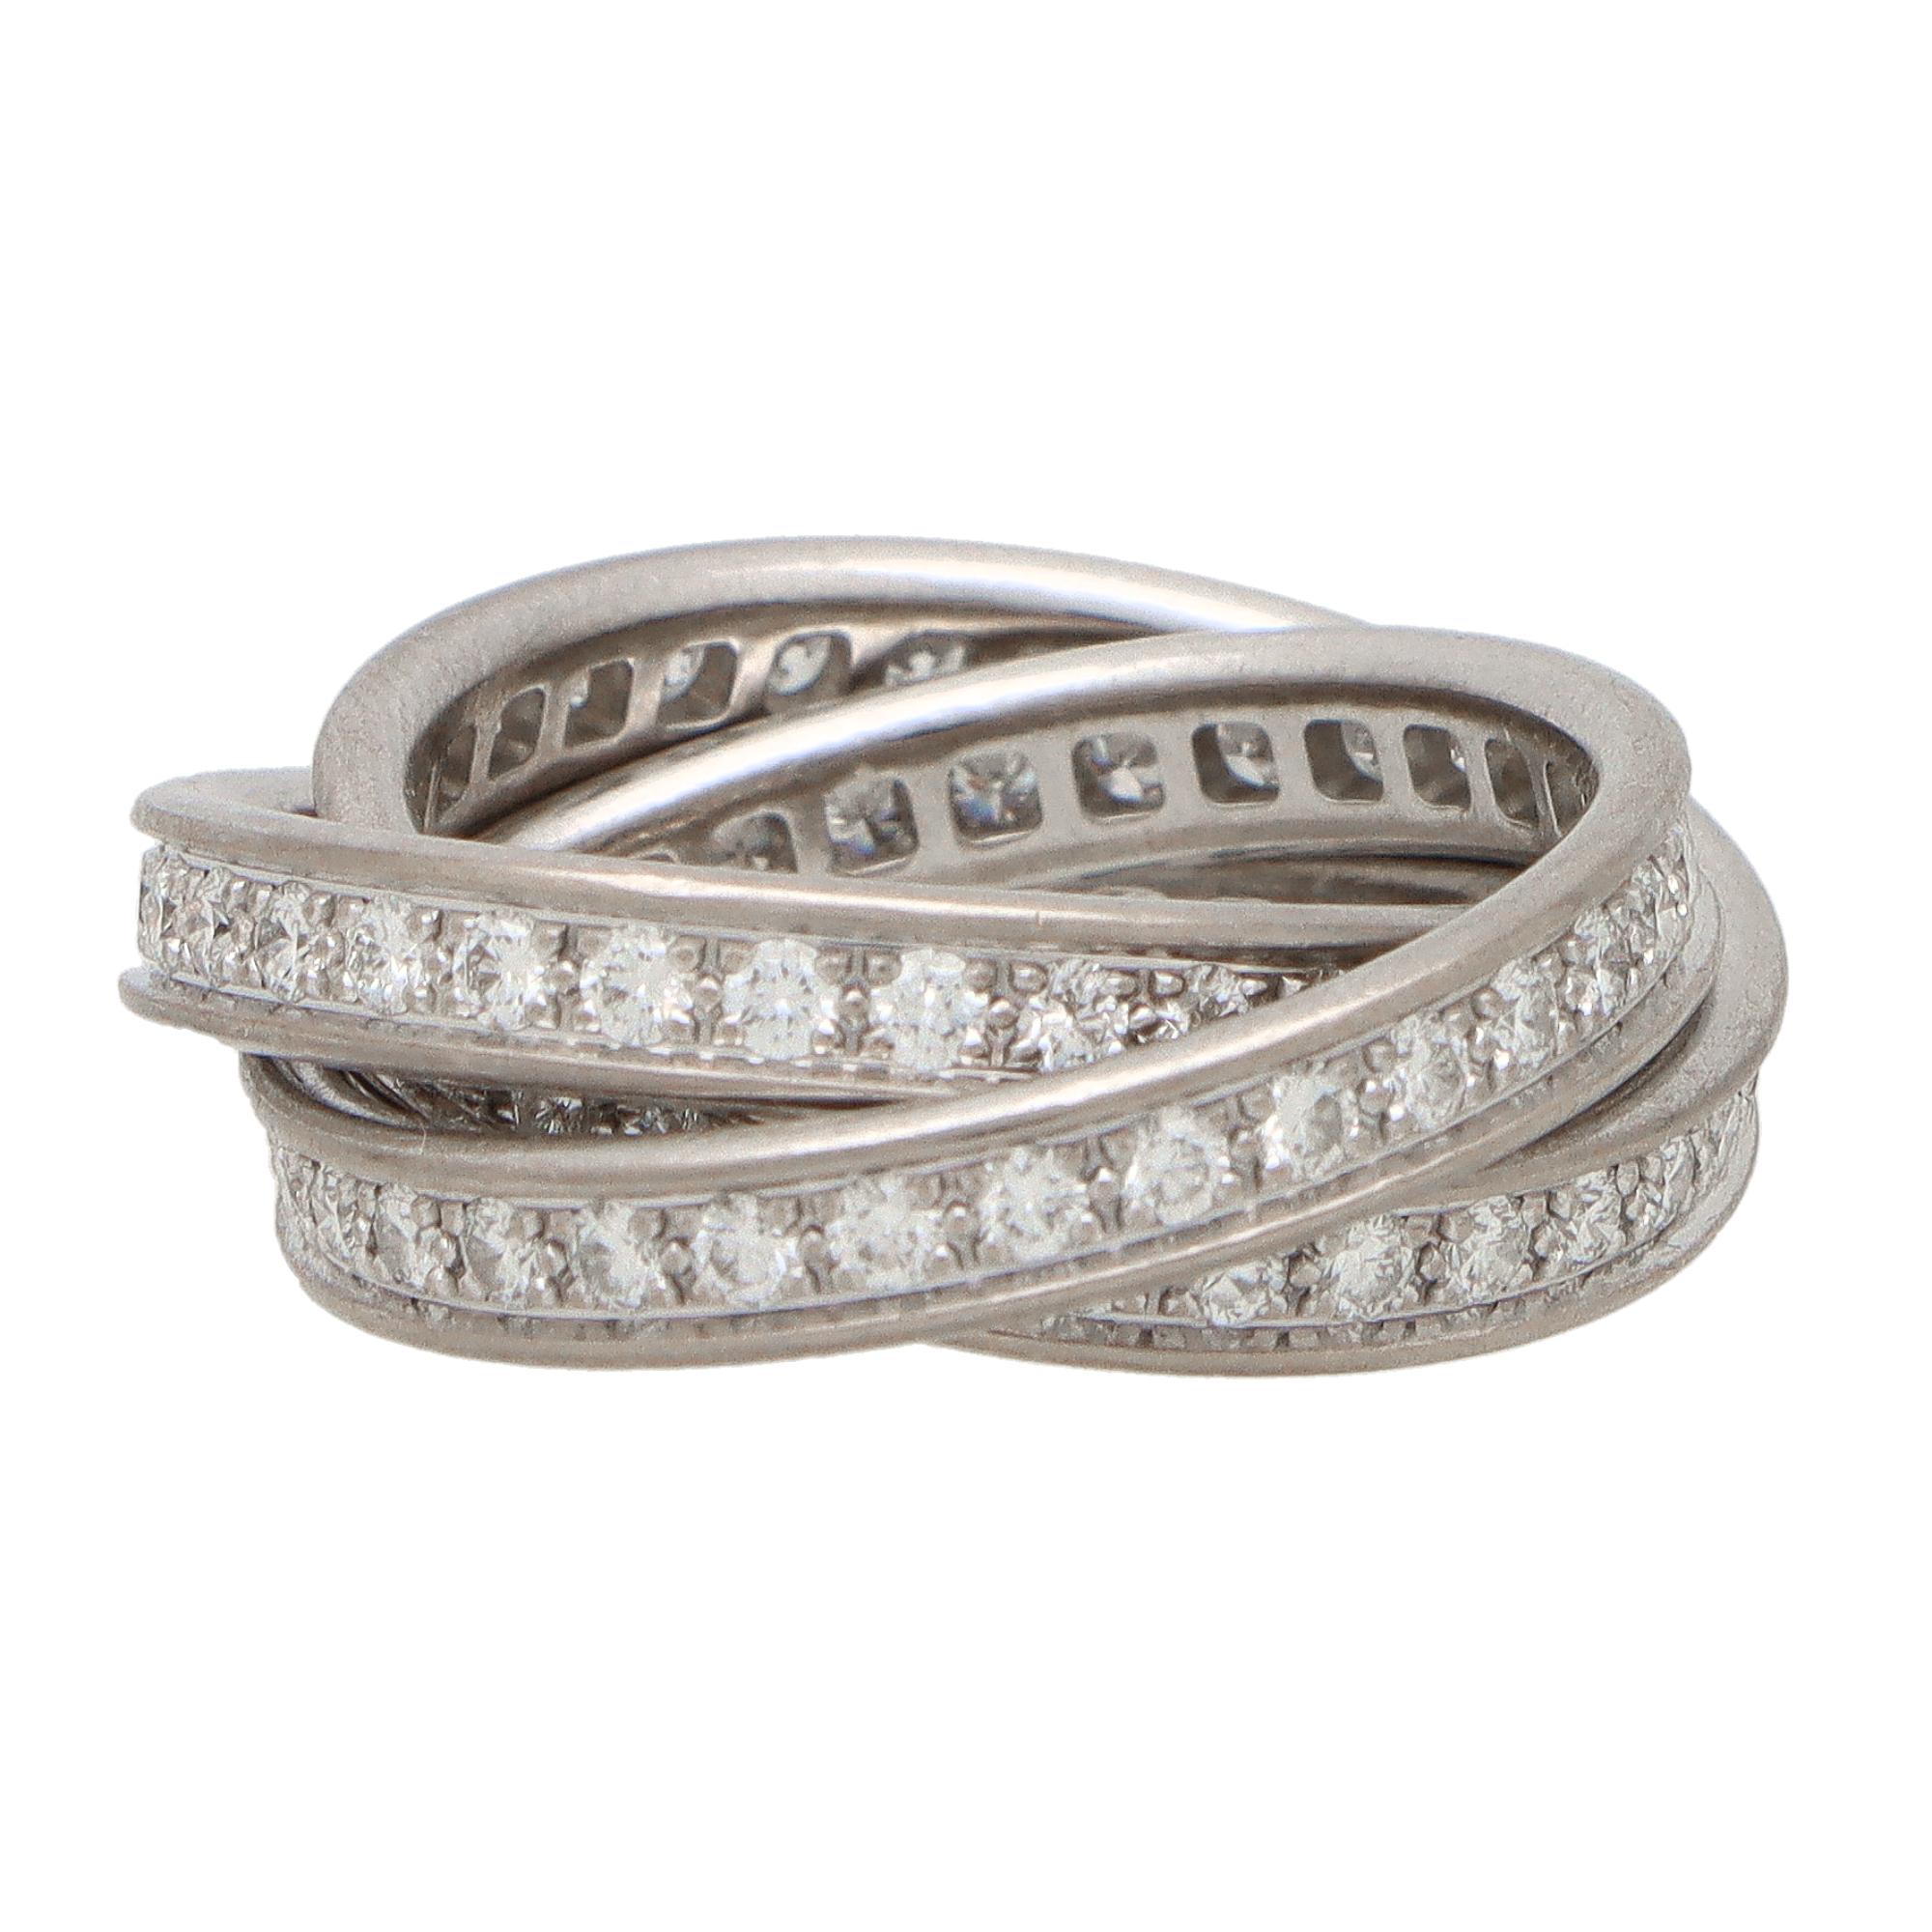 A classic Cartier diamond trinity ring set in 18k white gold.

The ring is composed of three interlinked 3.5-millimetre bands that are designed to roll with ease on the finger. All of the bands are completely set with round brilliant cut diamonds